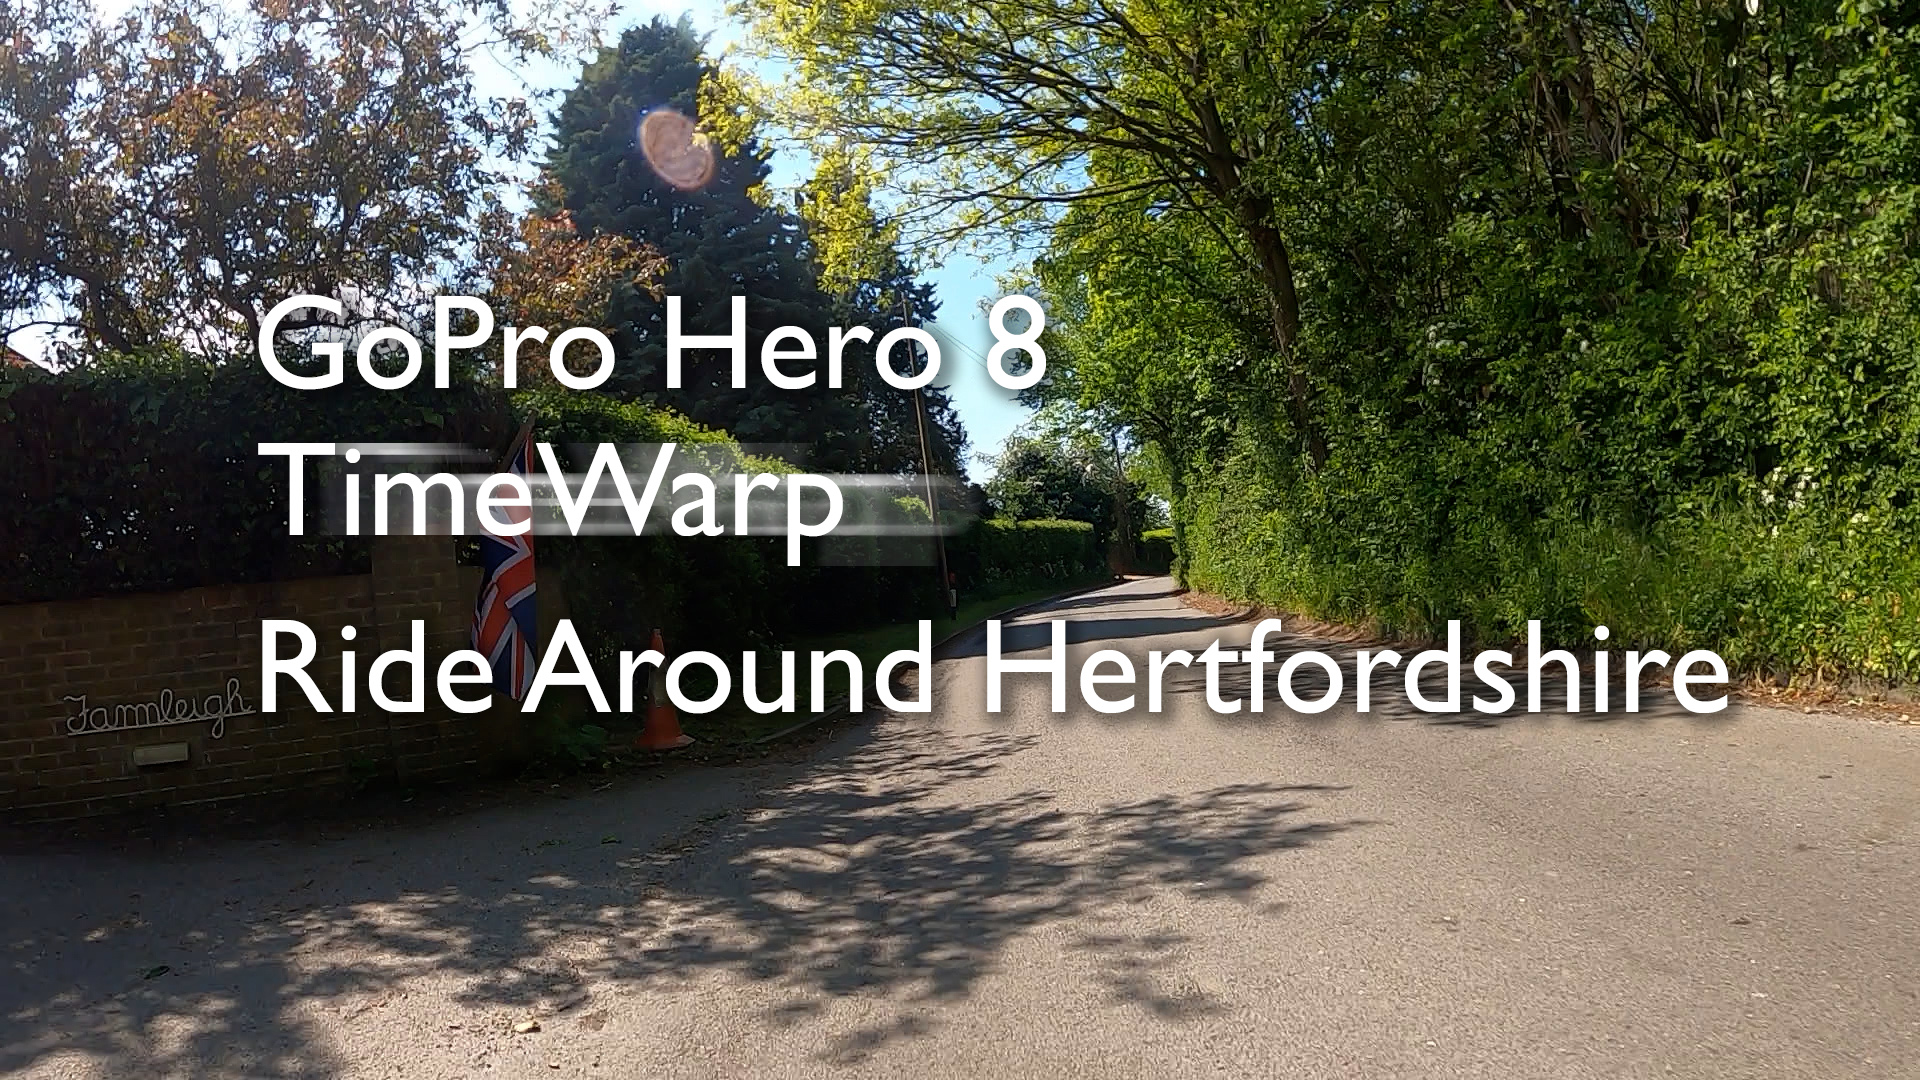 Playing with GoPro’s TimeWarp Feature